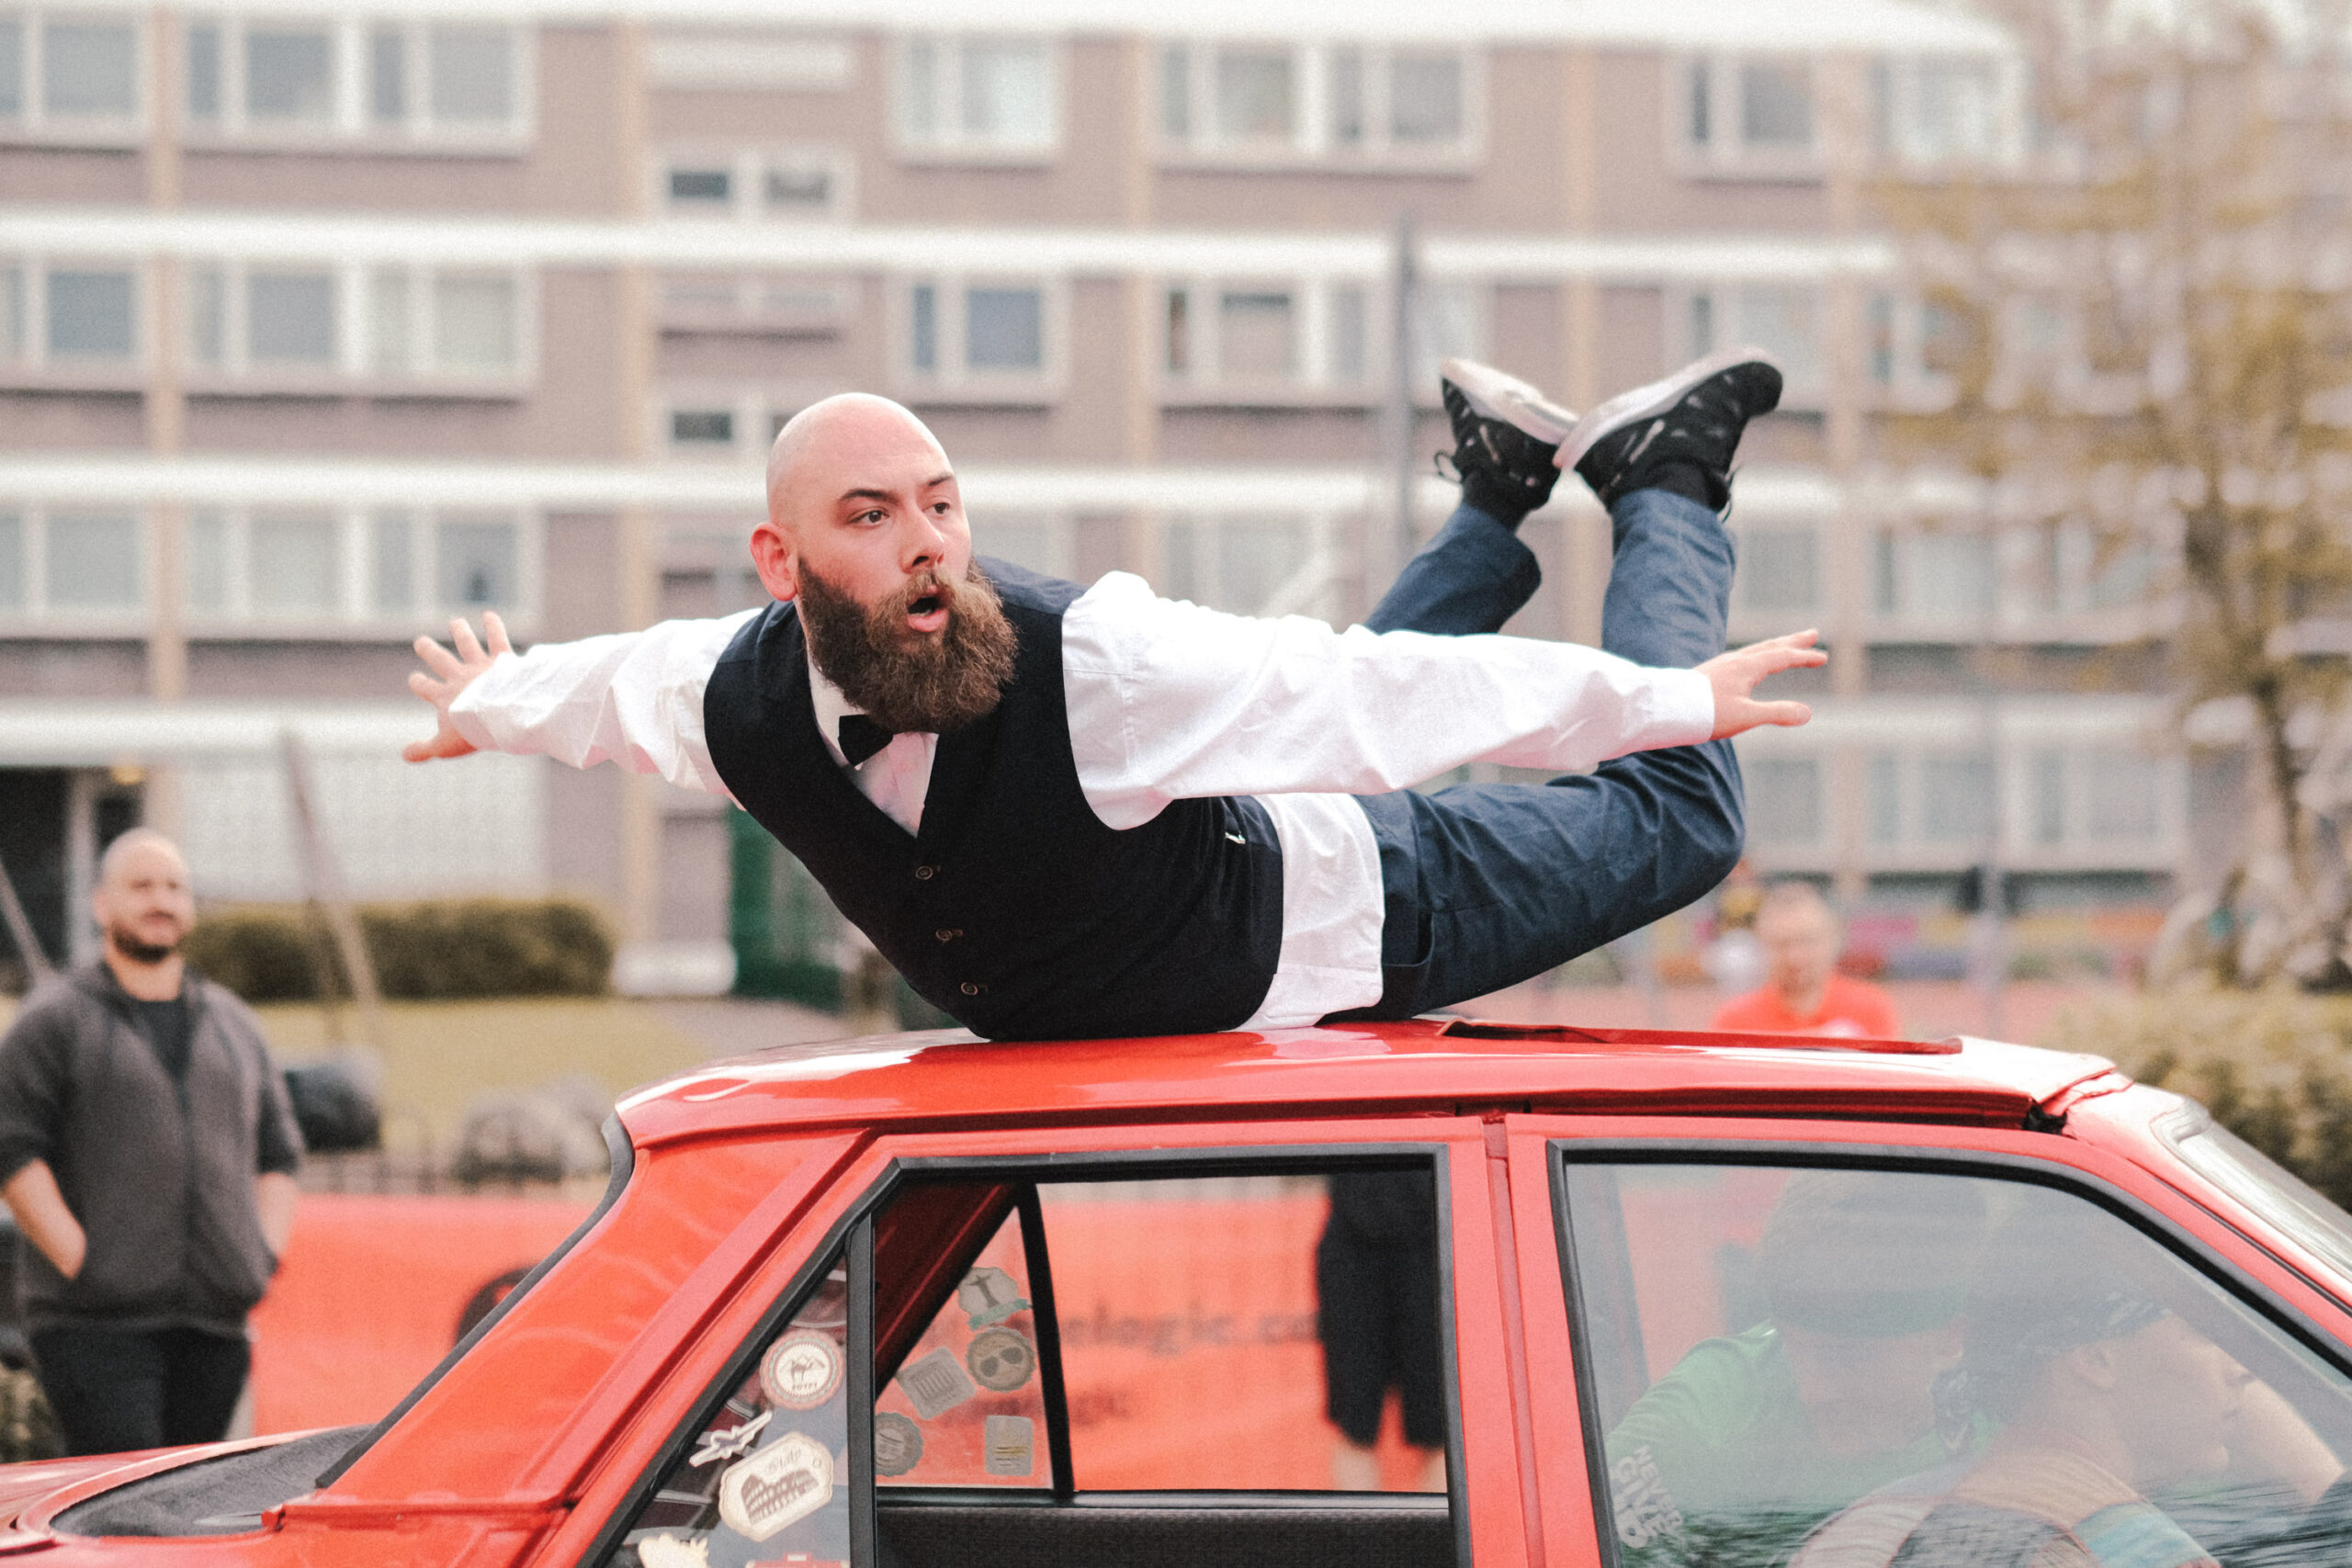 A dancer spins on his stomach on top of a red car. He's dressed in a suit and his arms are outstretched and his feet are bent back into the air